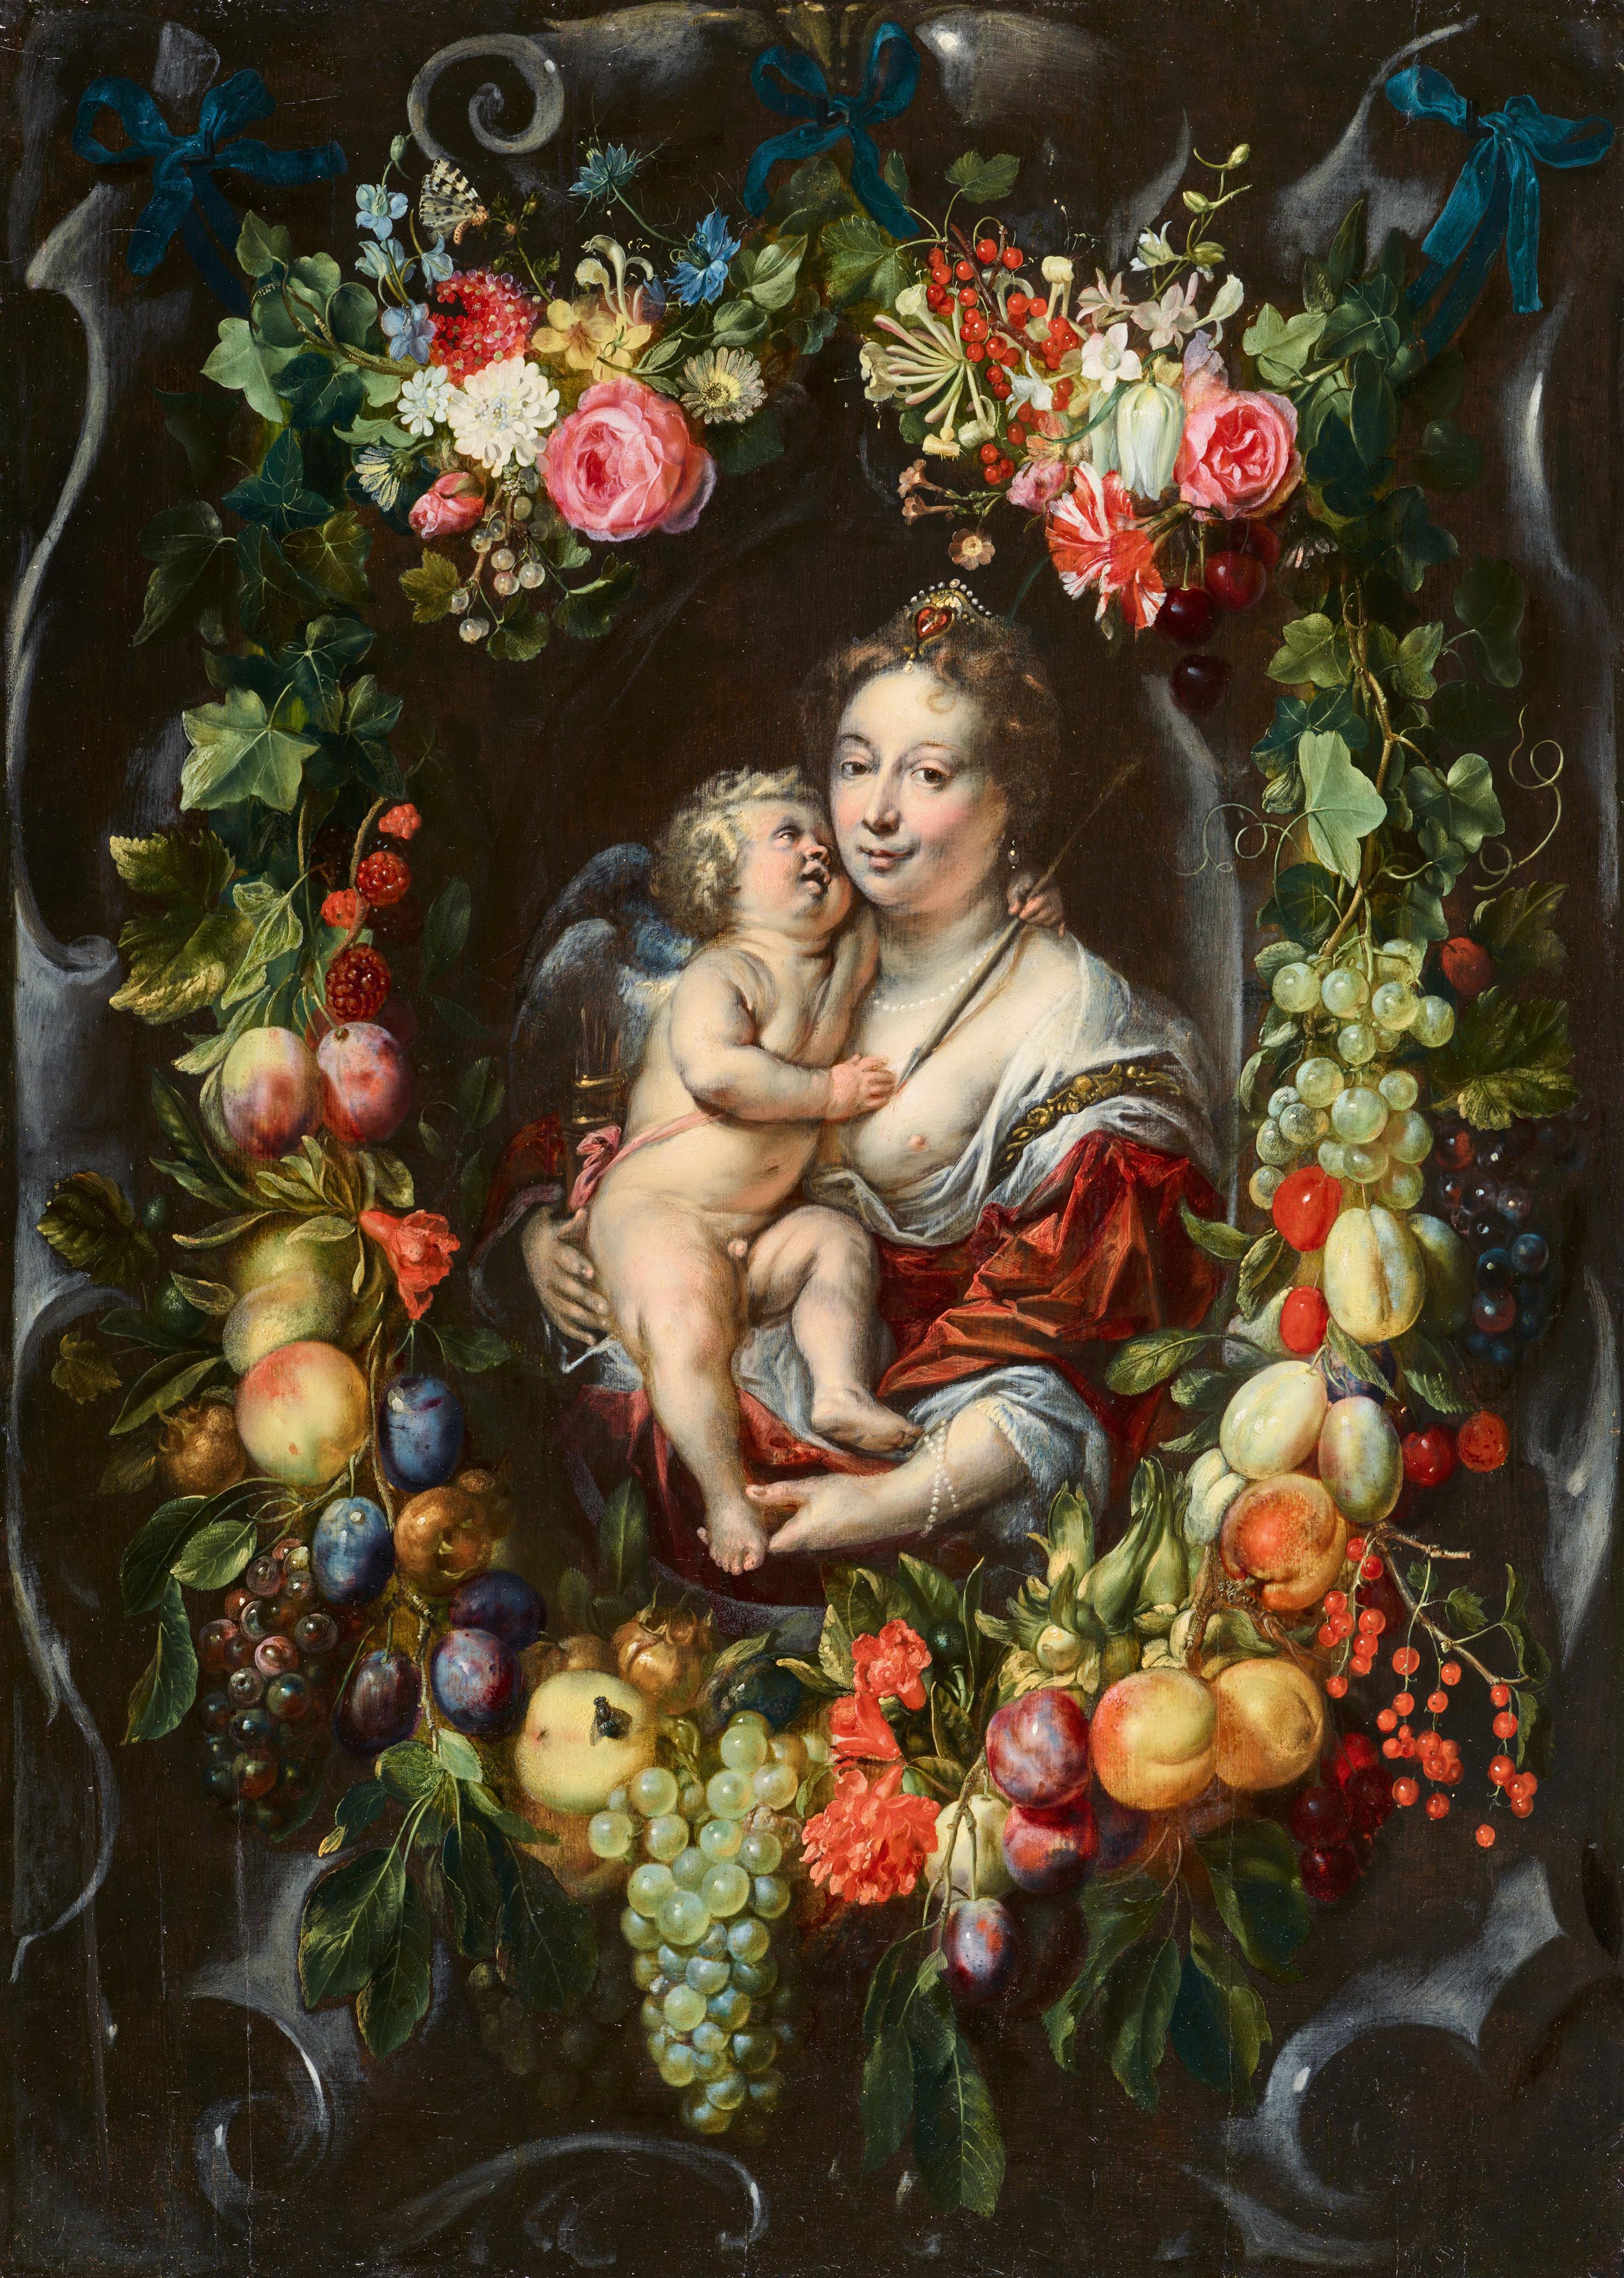 Frans Ykens
Cornelius Schut - Venus and Cupid surrounded by a floral wreath - image-1